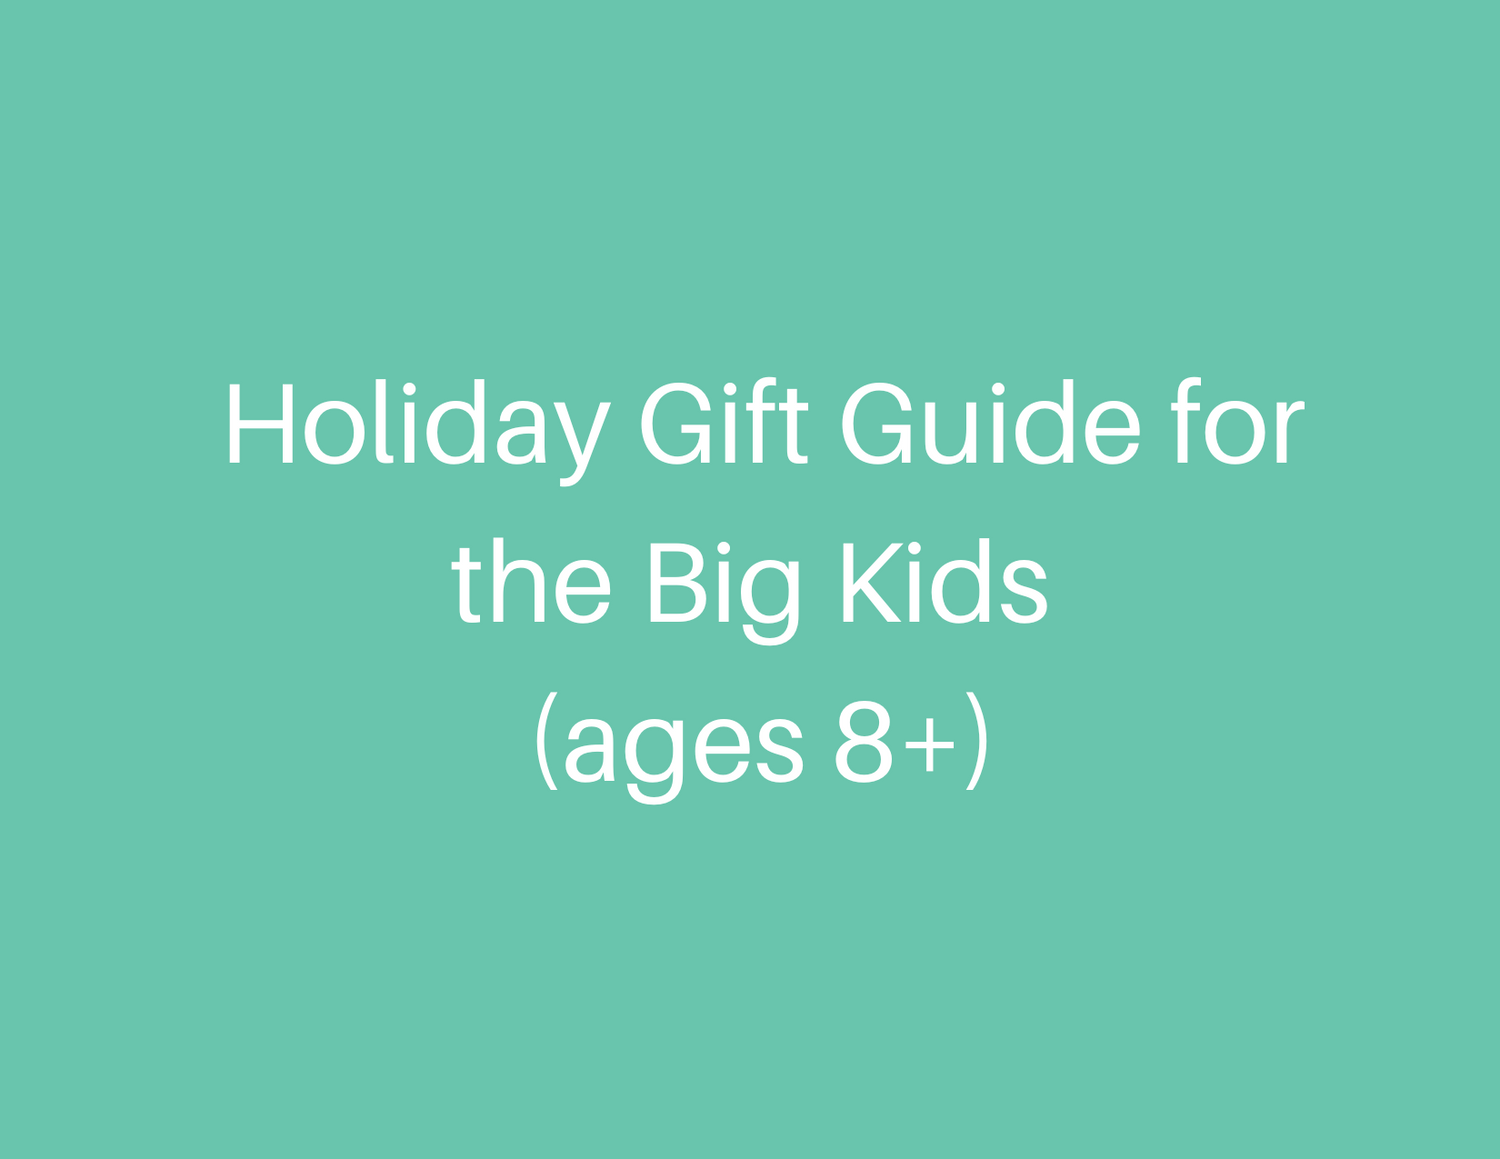 Holiday Gift Guide for the Big Kids (ages 8+)